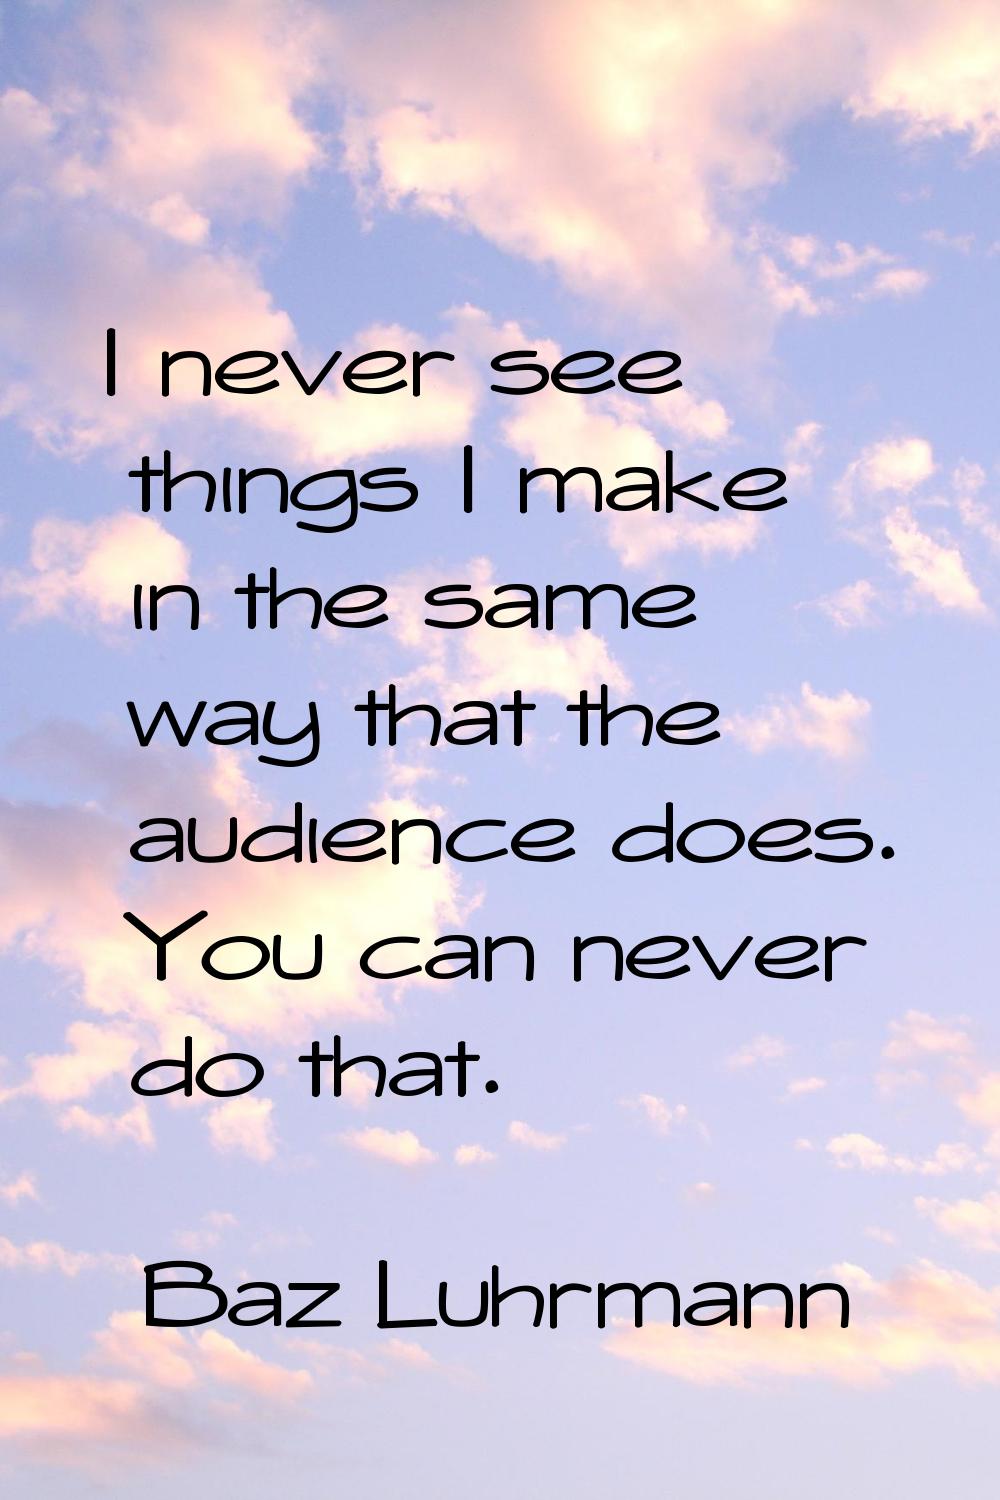 I never see things I make in the same way that the audience does. You can never do that.